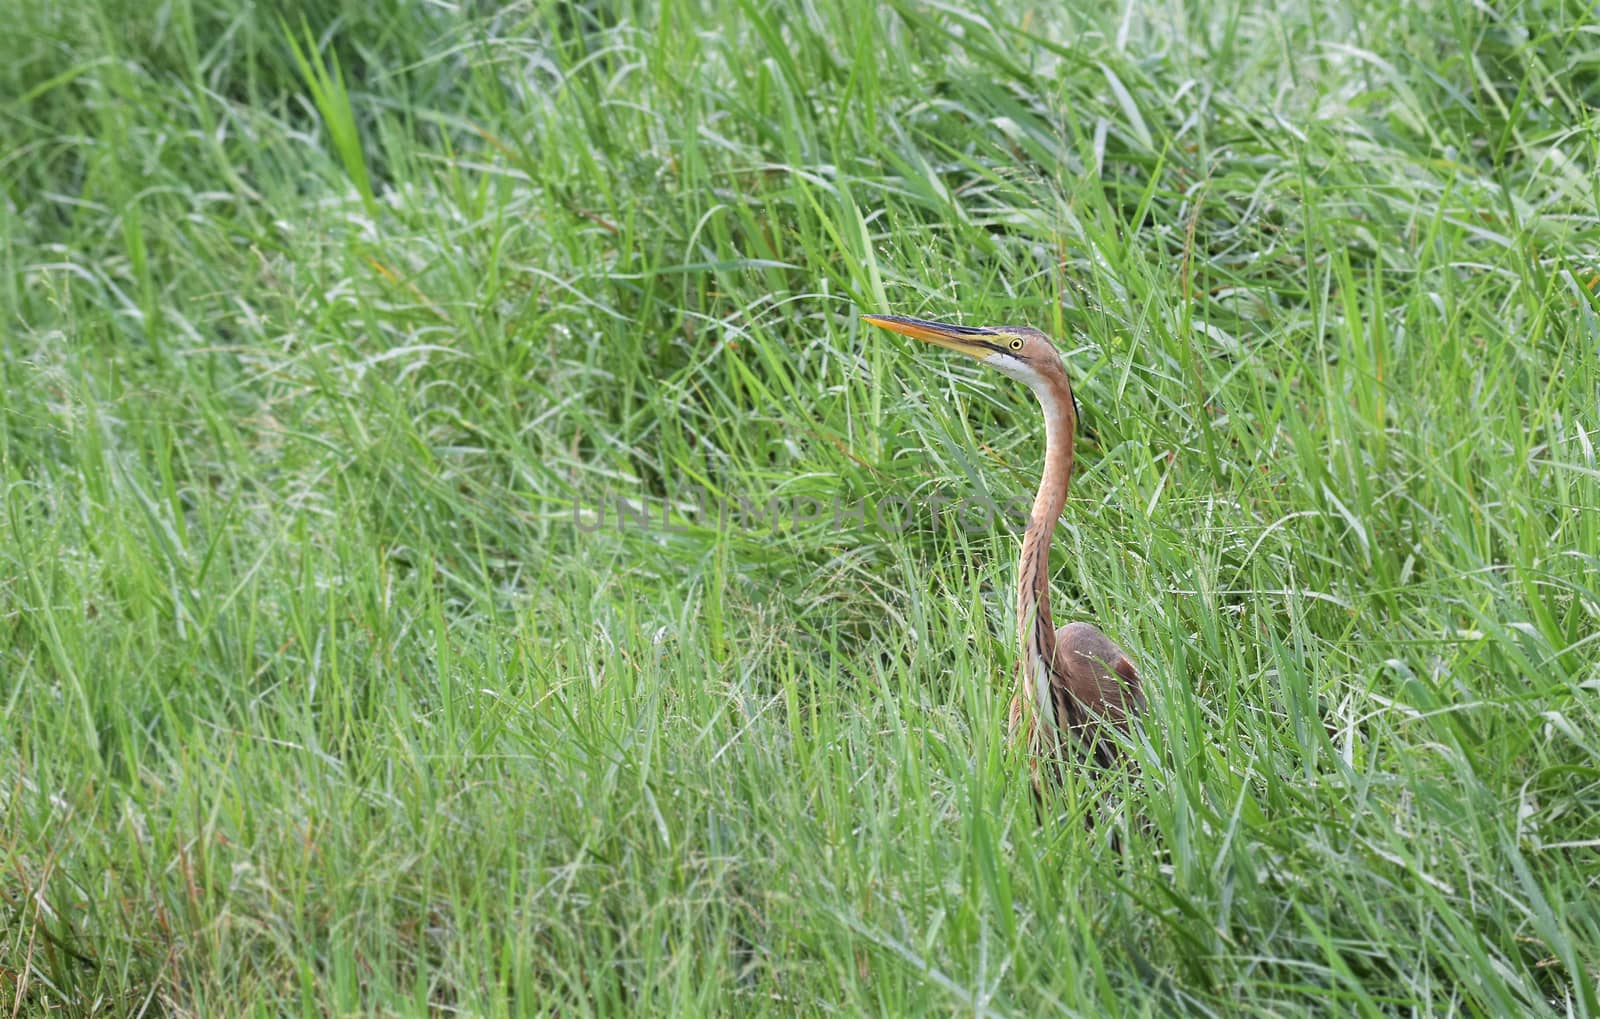 The purple heron is a wide-ranging species of wading bird in the heron family, Ardeidae. It breeds in Africa, central and southern Europe, and southern and eastern Asia.